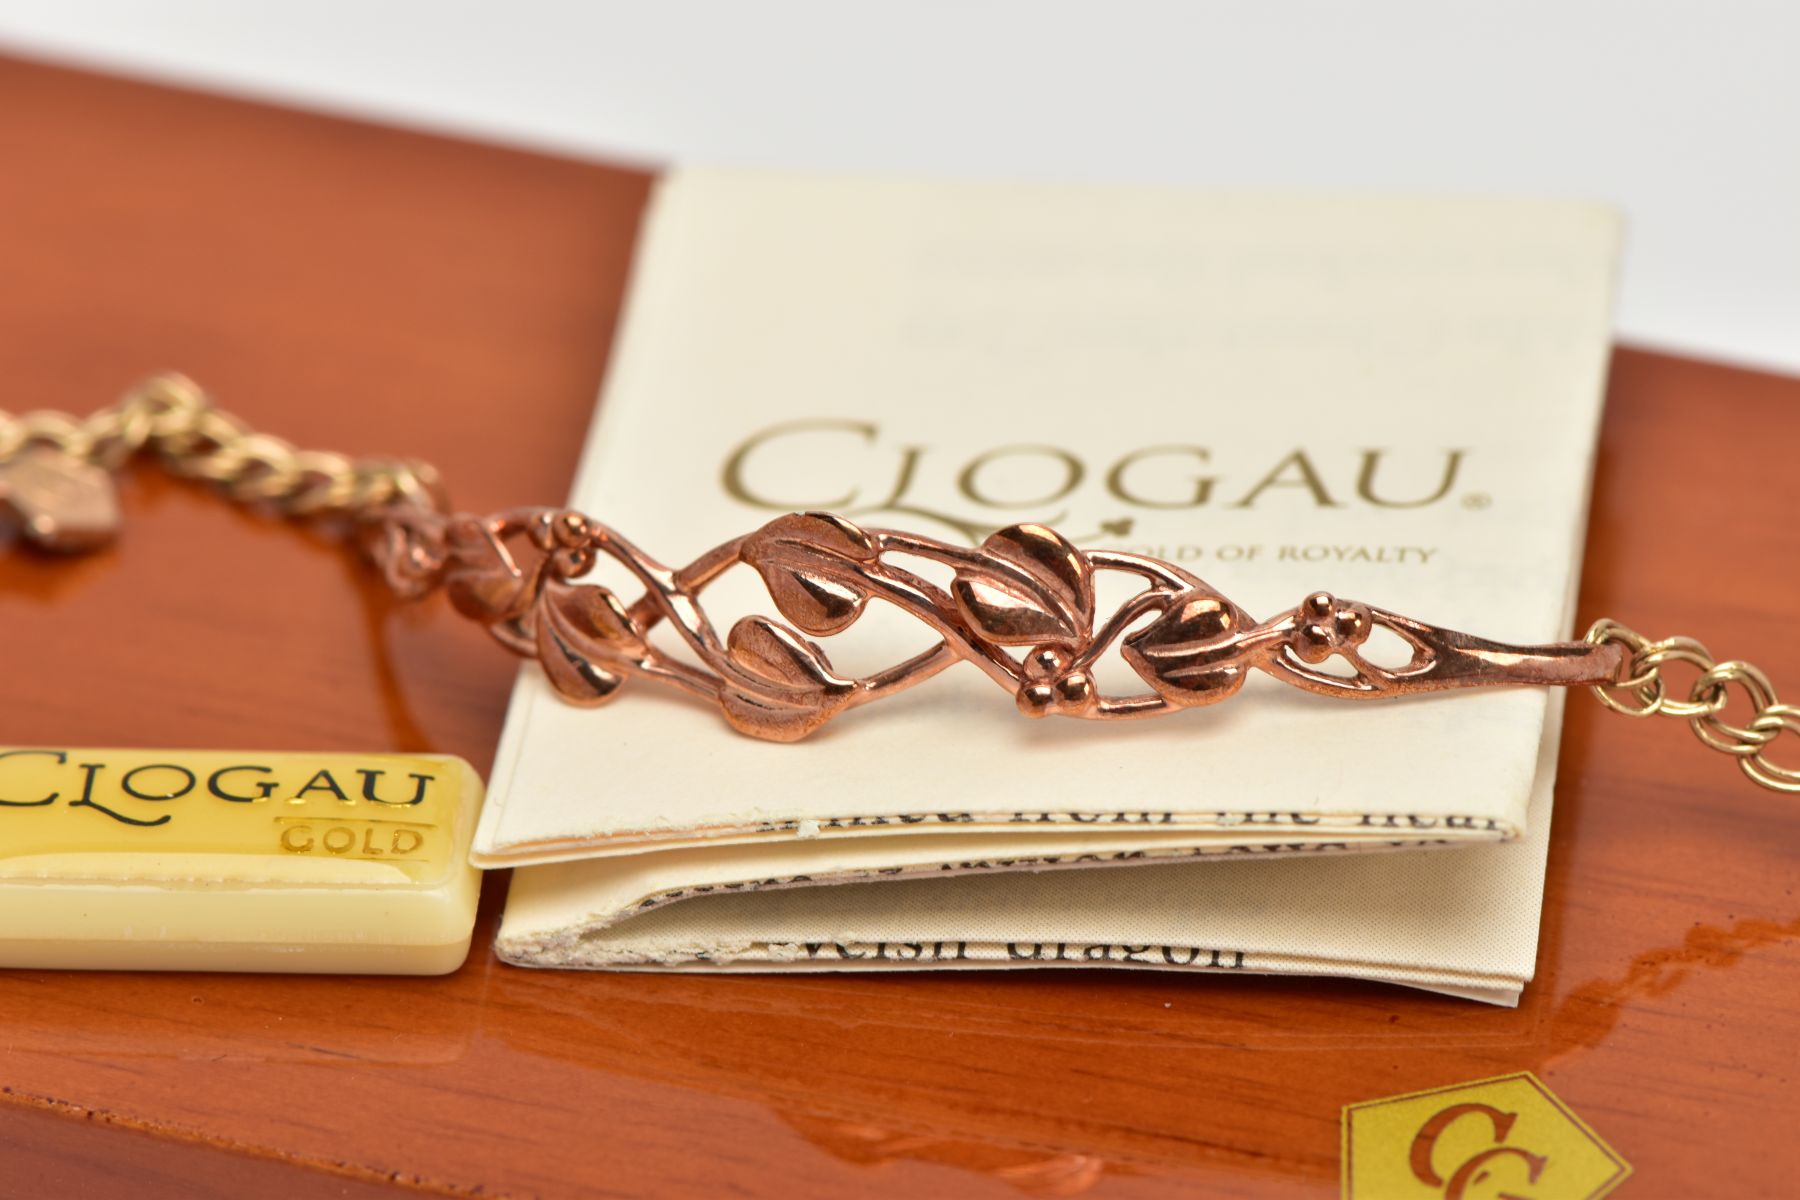 A 9CT GOLD BI-COLOUR CLOGAU BRACELET, the central panel of openwork 'Tree of Life' design in rose - Image 2 of 3